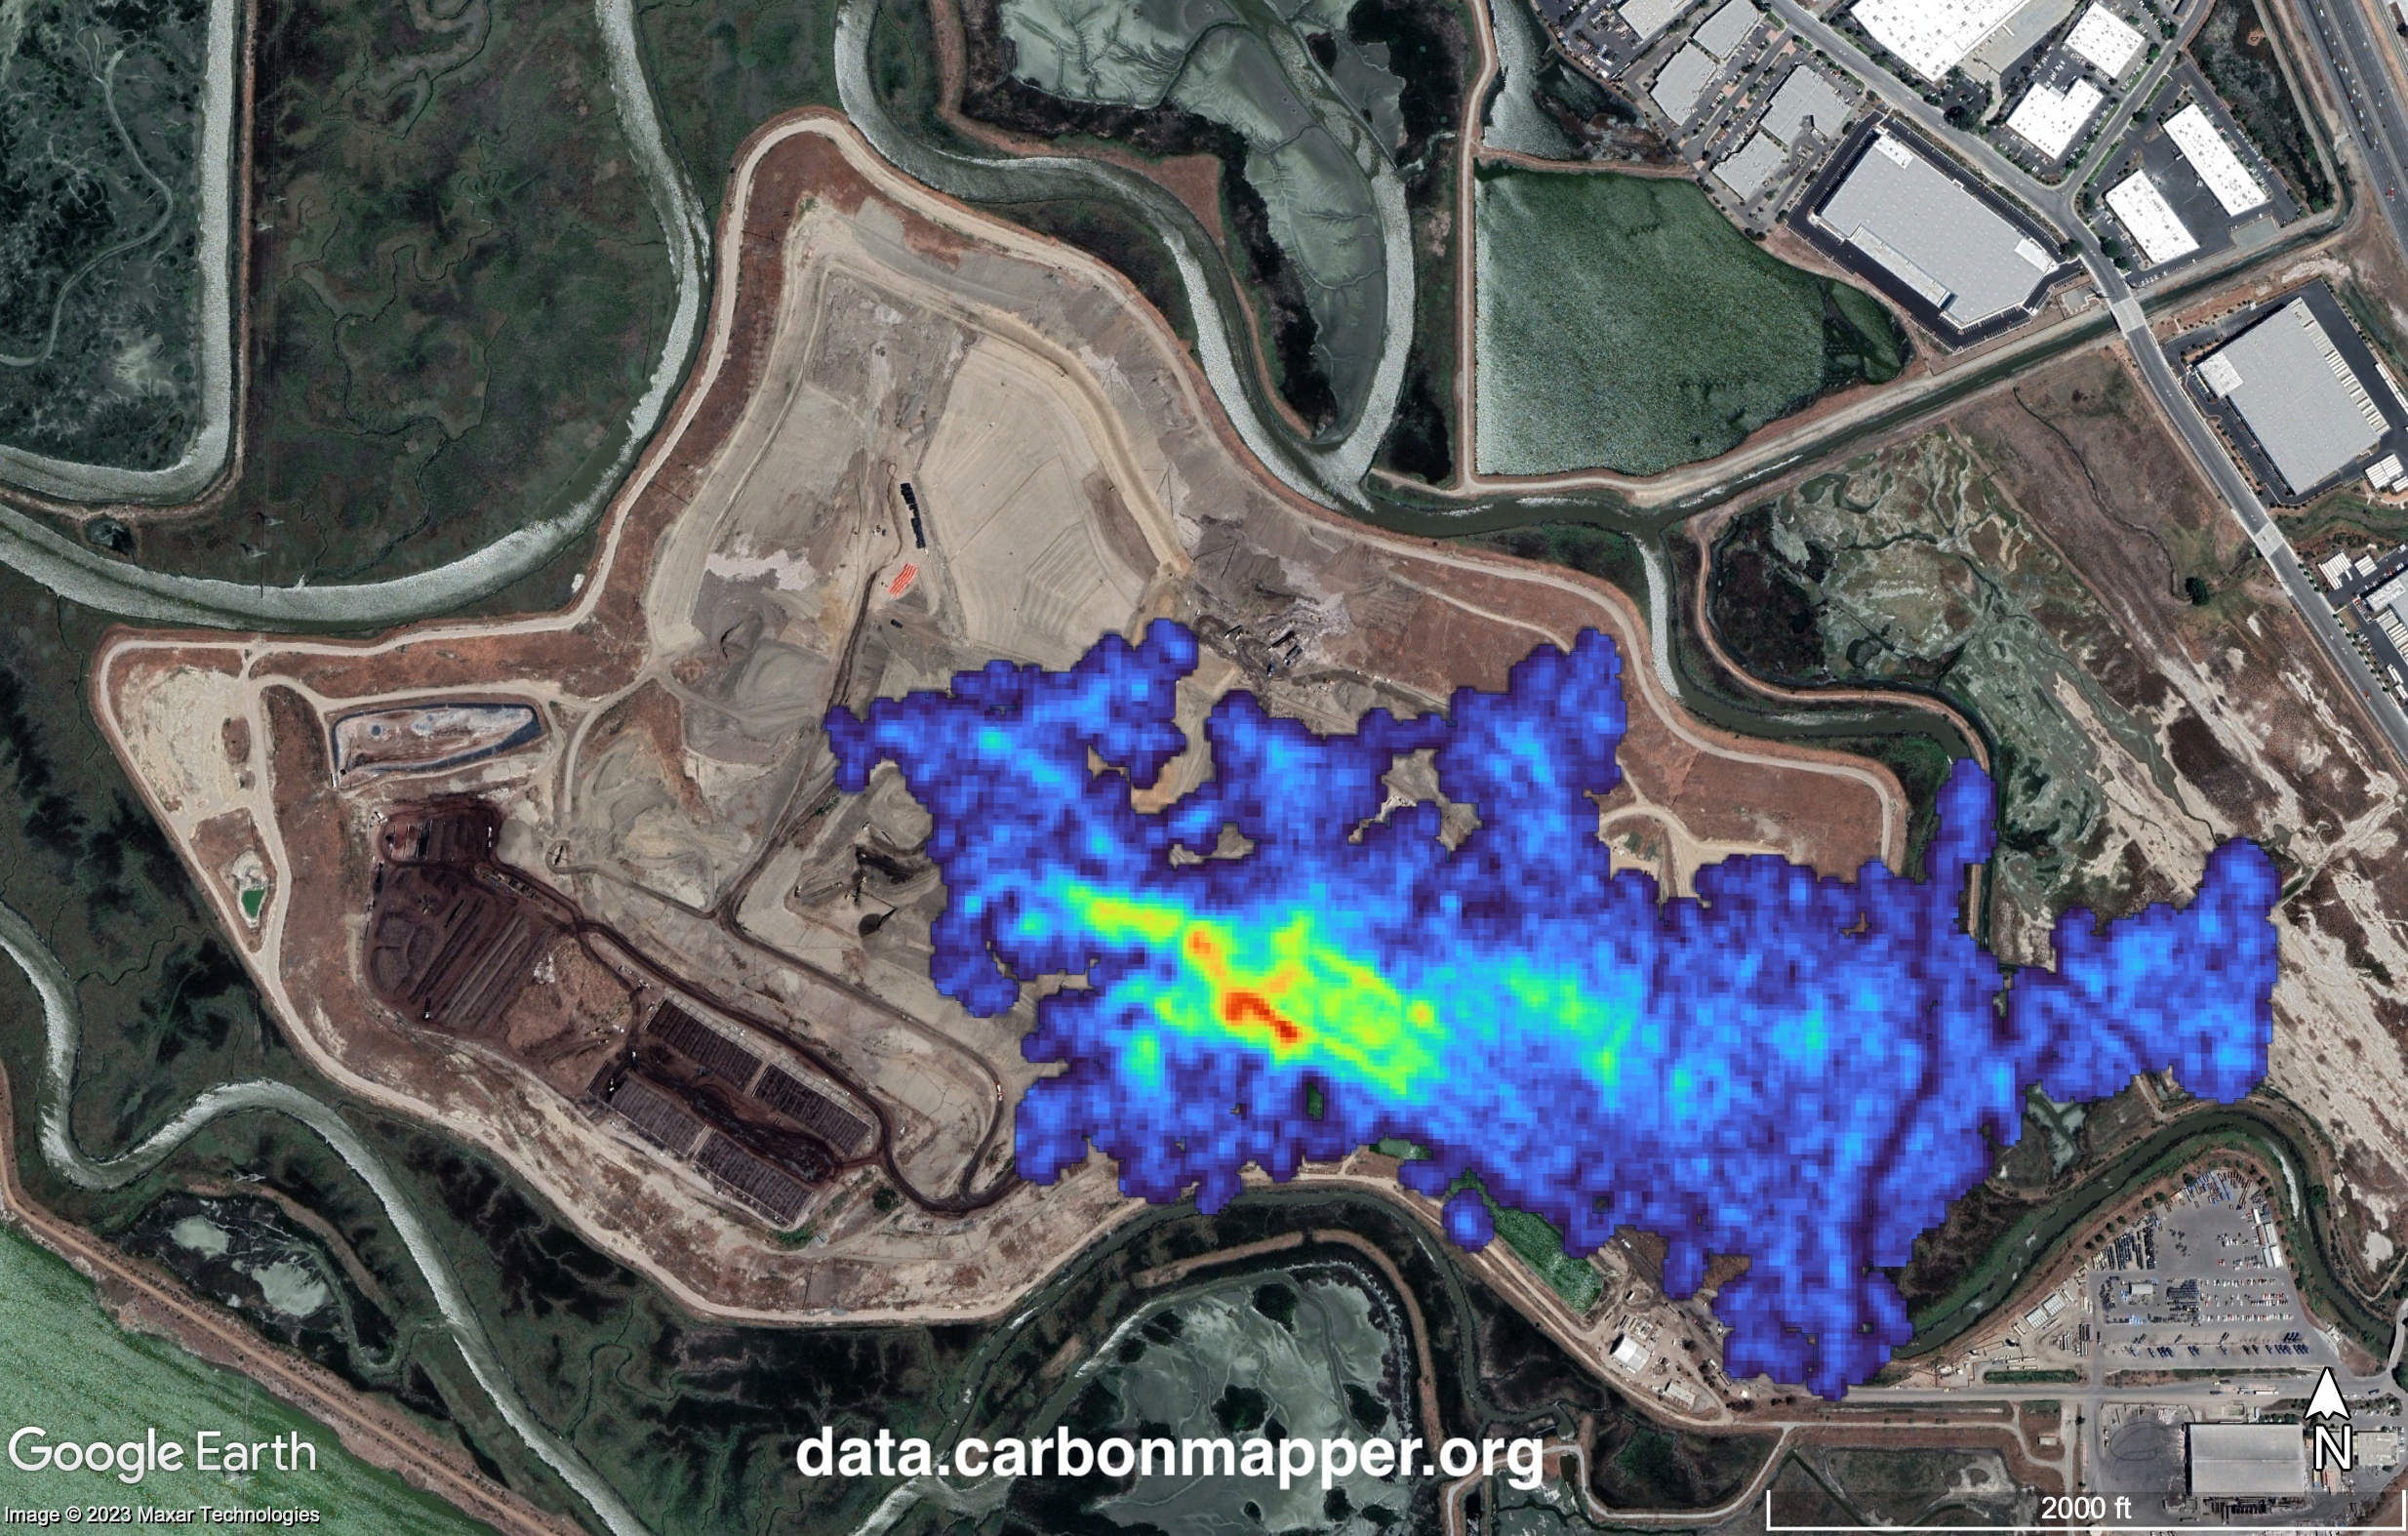 Methane plume from a landfill collected from airborne remote sensing survey using AVRIS-NG. Provided by Carbon Mapper.